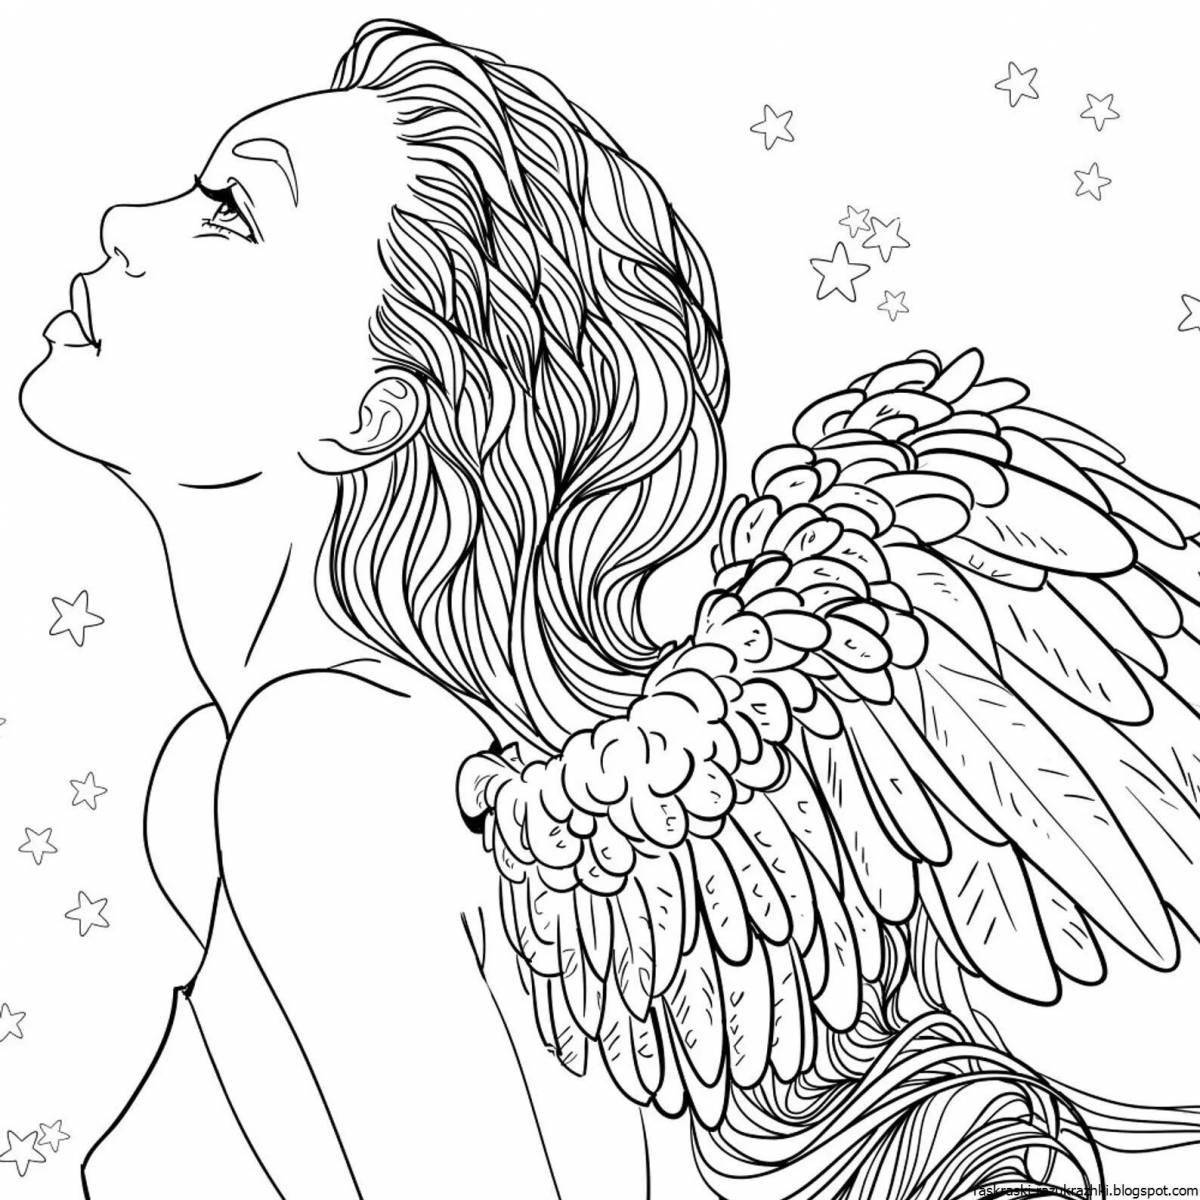 Coloring book with angel face angel girl